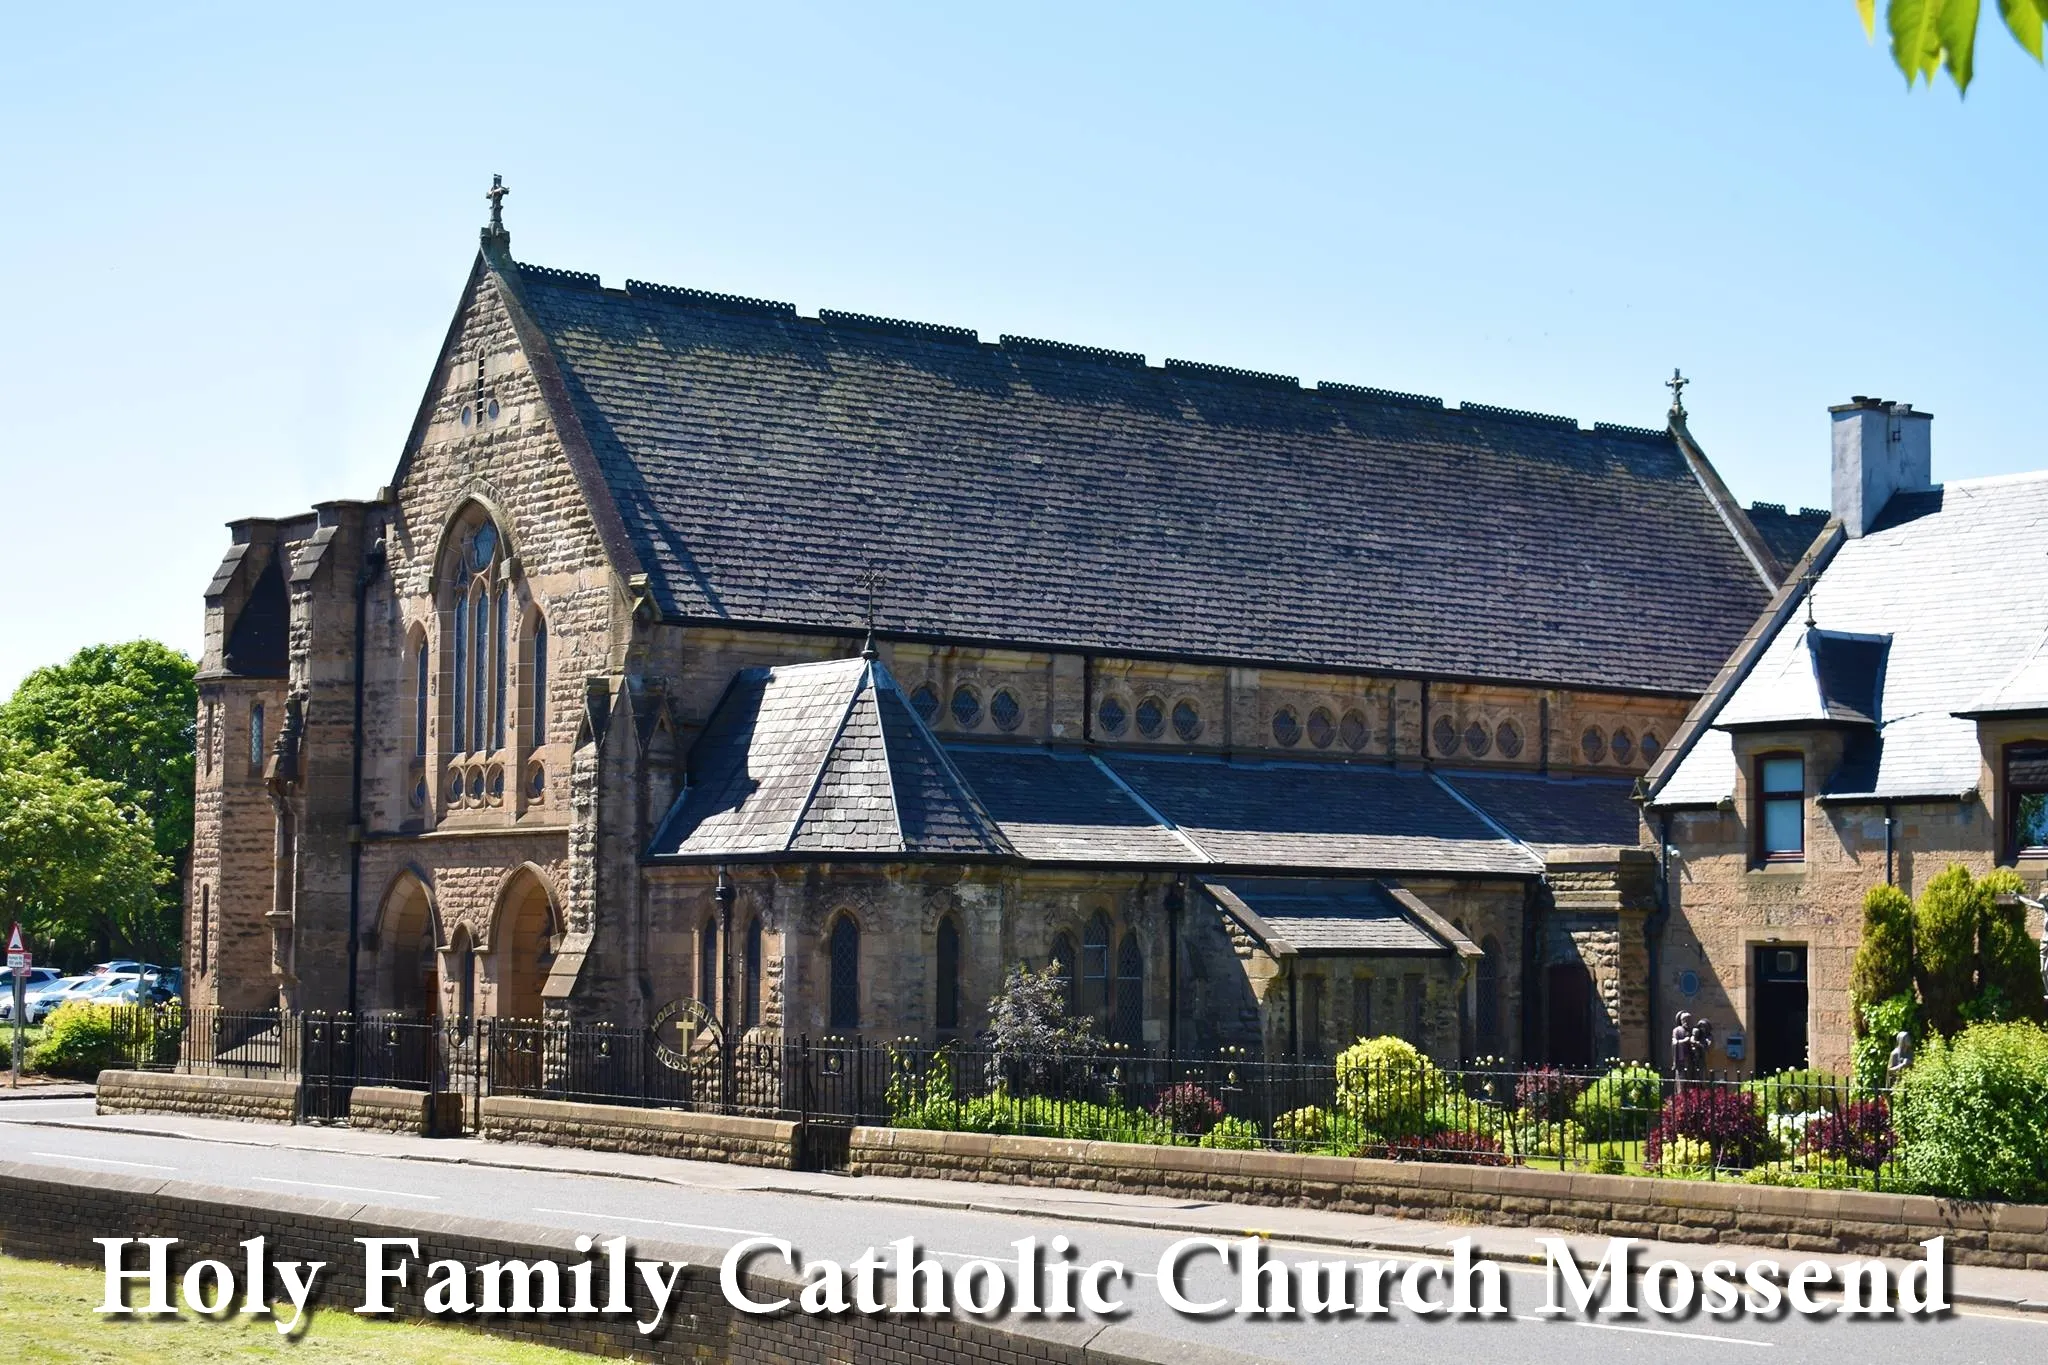 Photo showing: Holy Family Catholic Church Mossend, built in 1884, designed by Pugin and Pugin, Westminister.